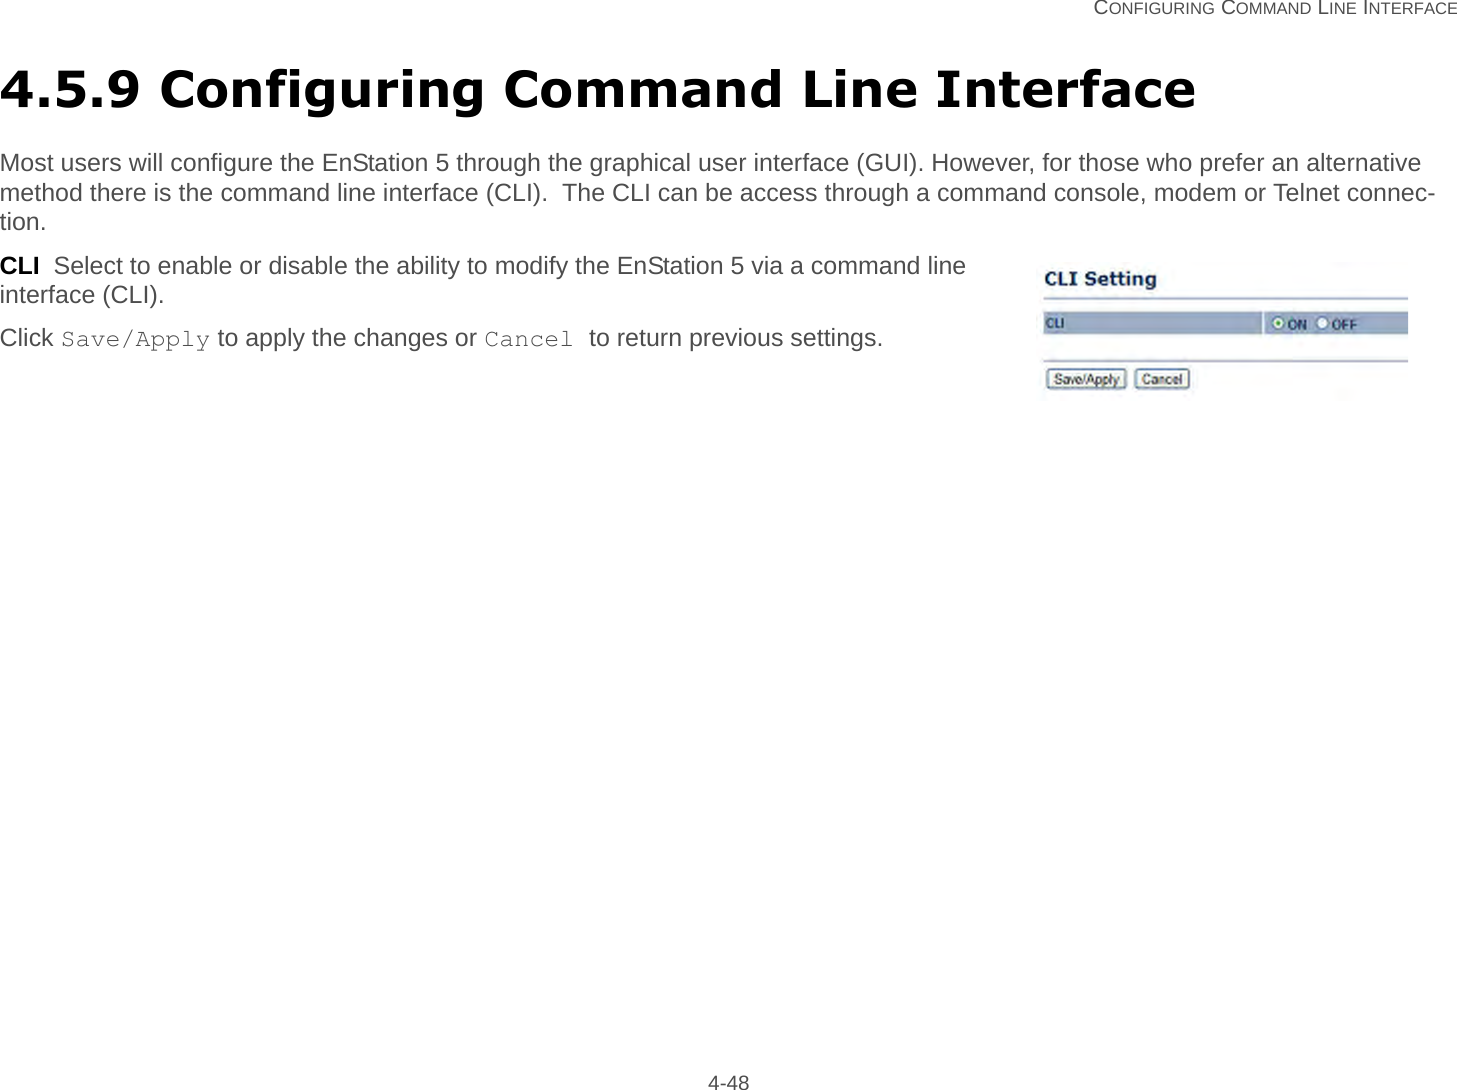   CONFIGURING COMMAND LINE INTERFACE 4-484.5.9 Configuring Command Line InterfaceMost users will configure the EnStation 5 through the graphical user interface (GUI). However, for those who prefer an alternative method there is the command line interface (CLI).  The CLI can be access through a command console, modem or Telnet connec-tion.CLI  Select to enable or disable the ability to modify the EnStation 5 via a command line interface (CLI).Click Save/Apply to apply the changes or Cancel to return previous settings.